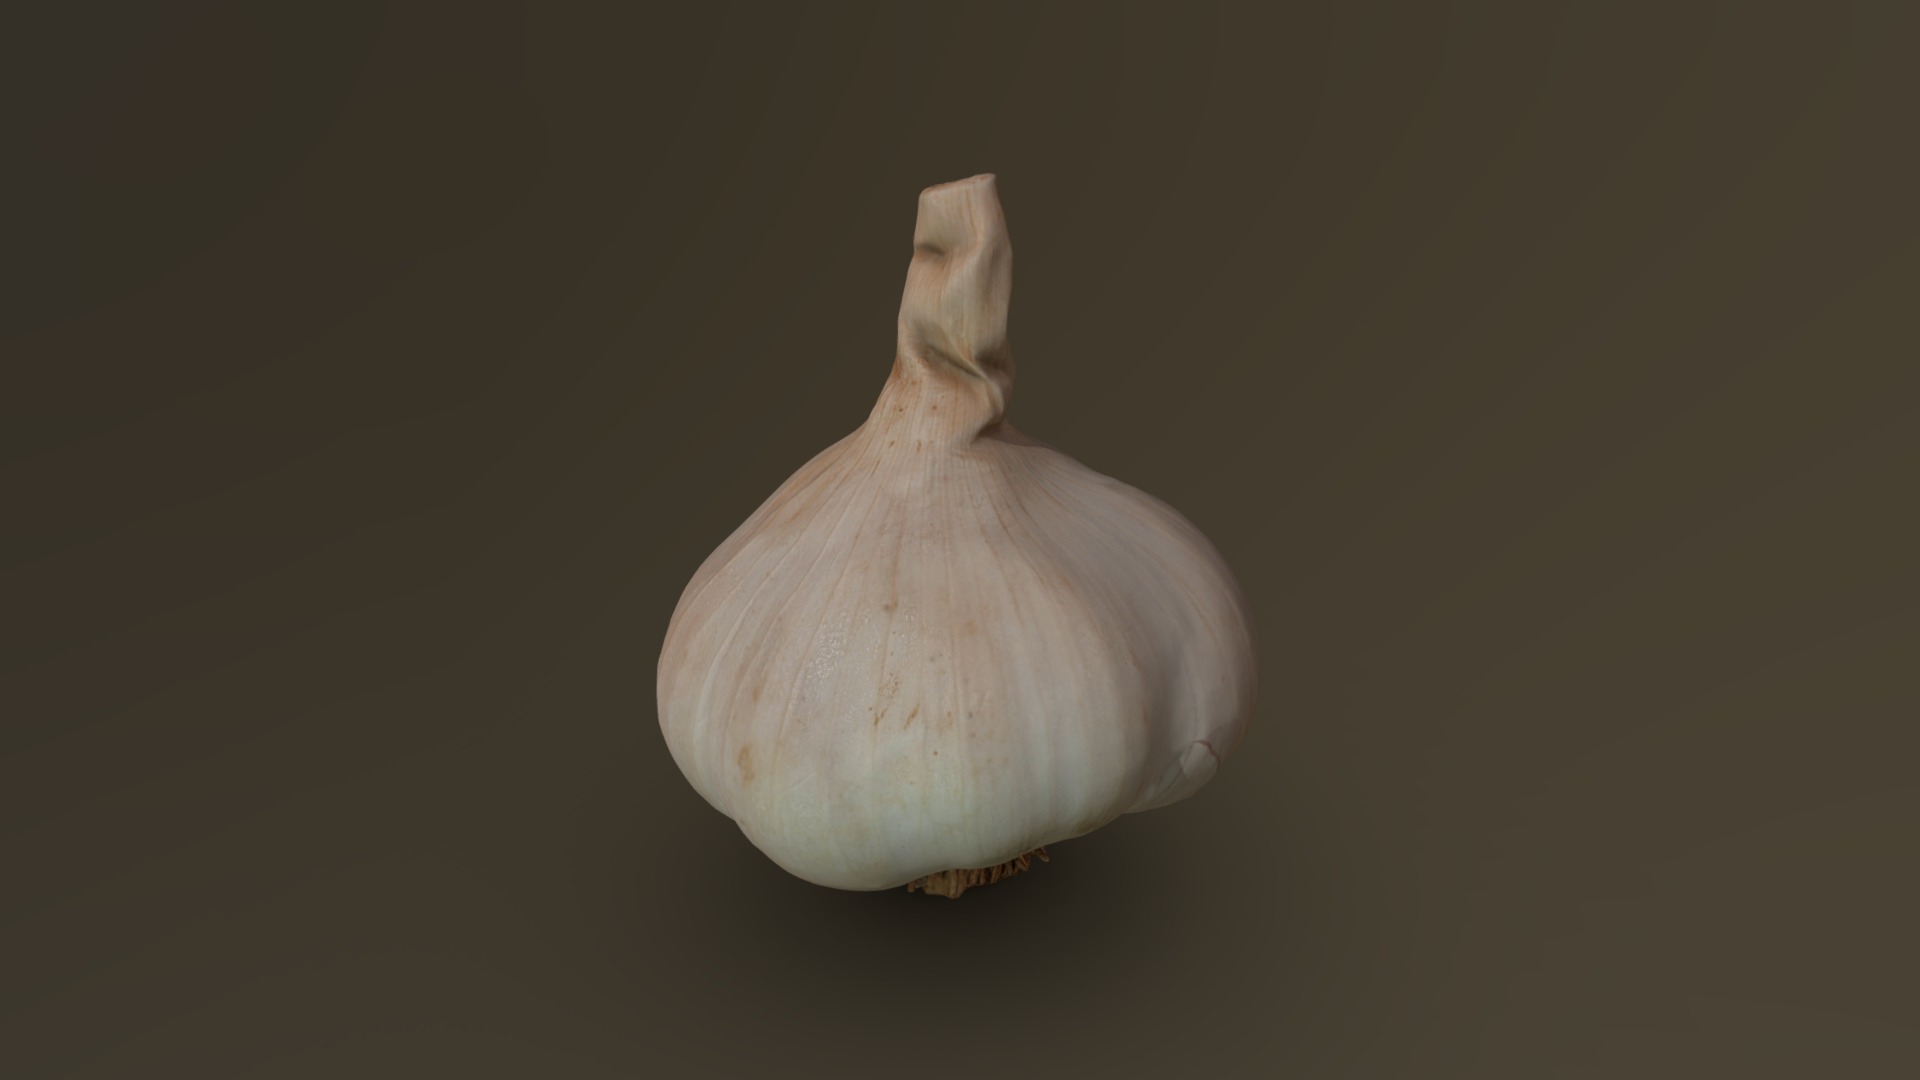 3D model Dried Garlic Head 01 - This is a 3D model of the Dried Garlic Head 01. The 3D model is about a white garlic on a black background.